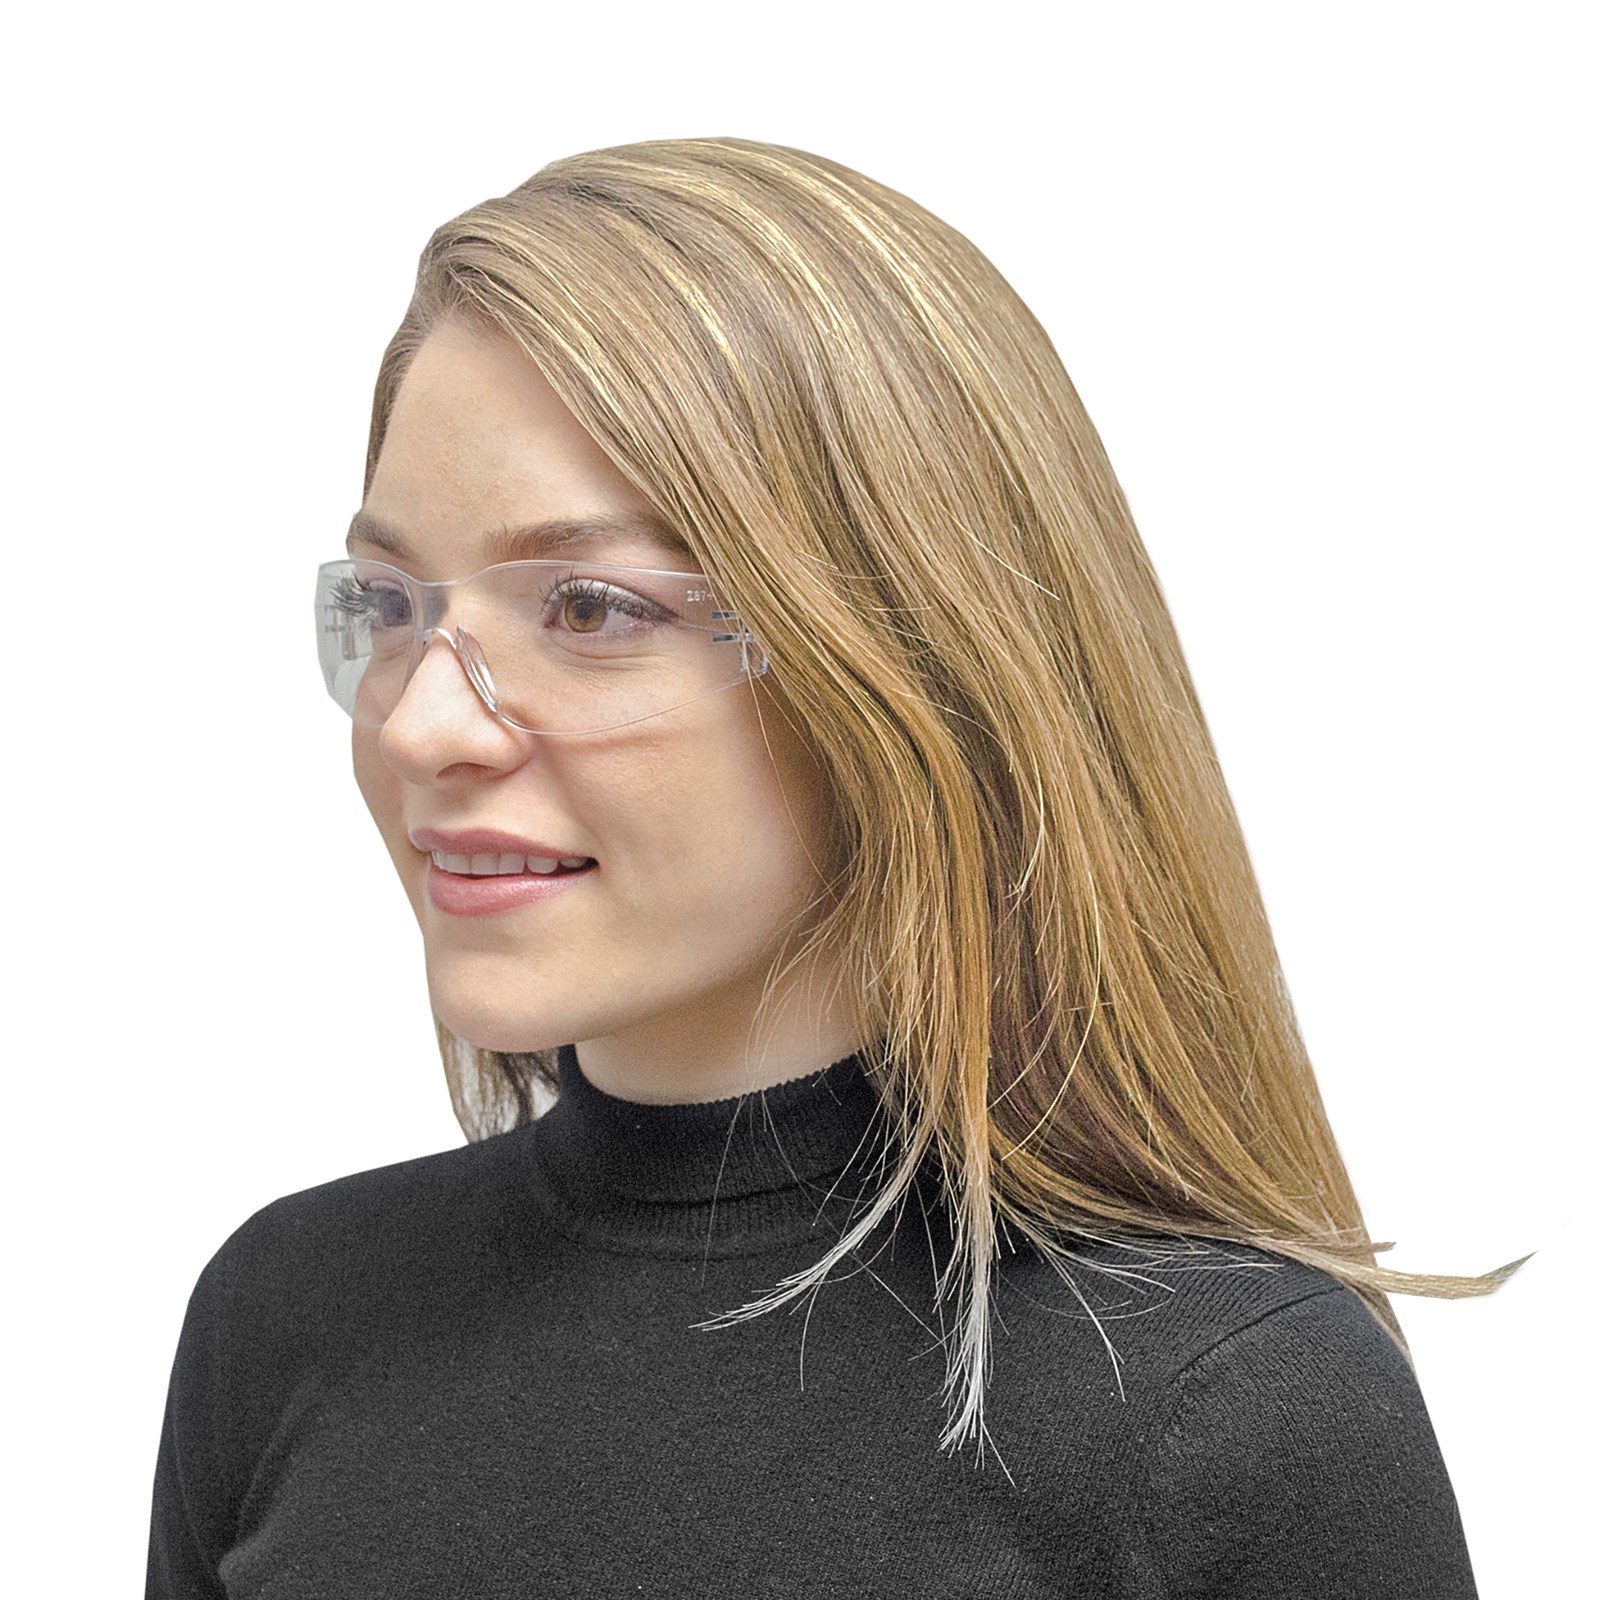 A woman wearing the all clear JORESTECH ANSI compliant PC safety glasses for high impact